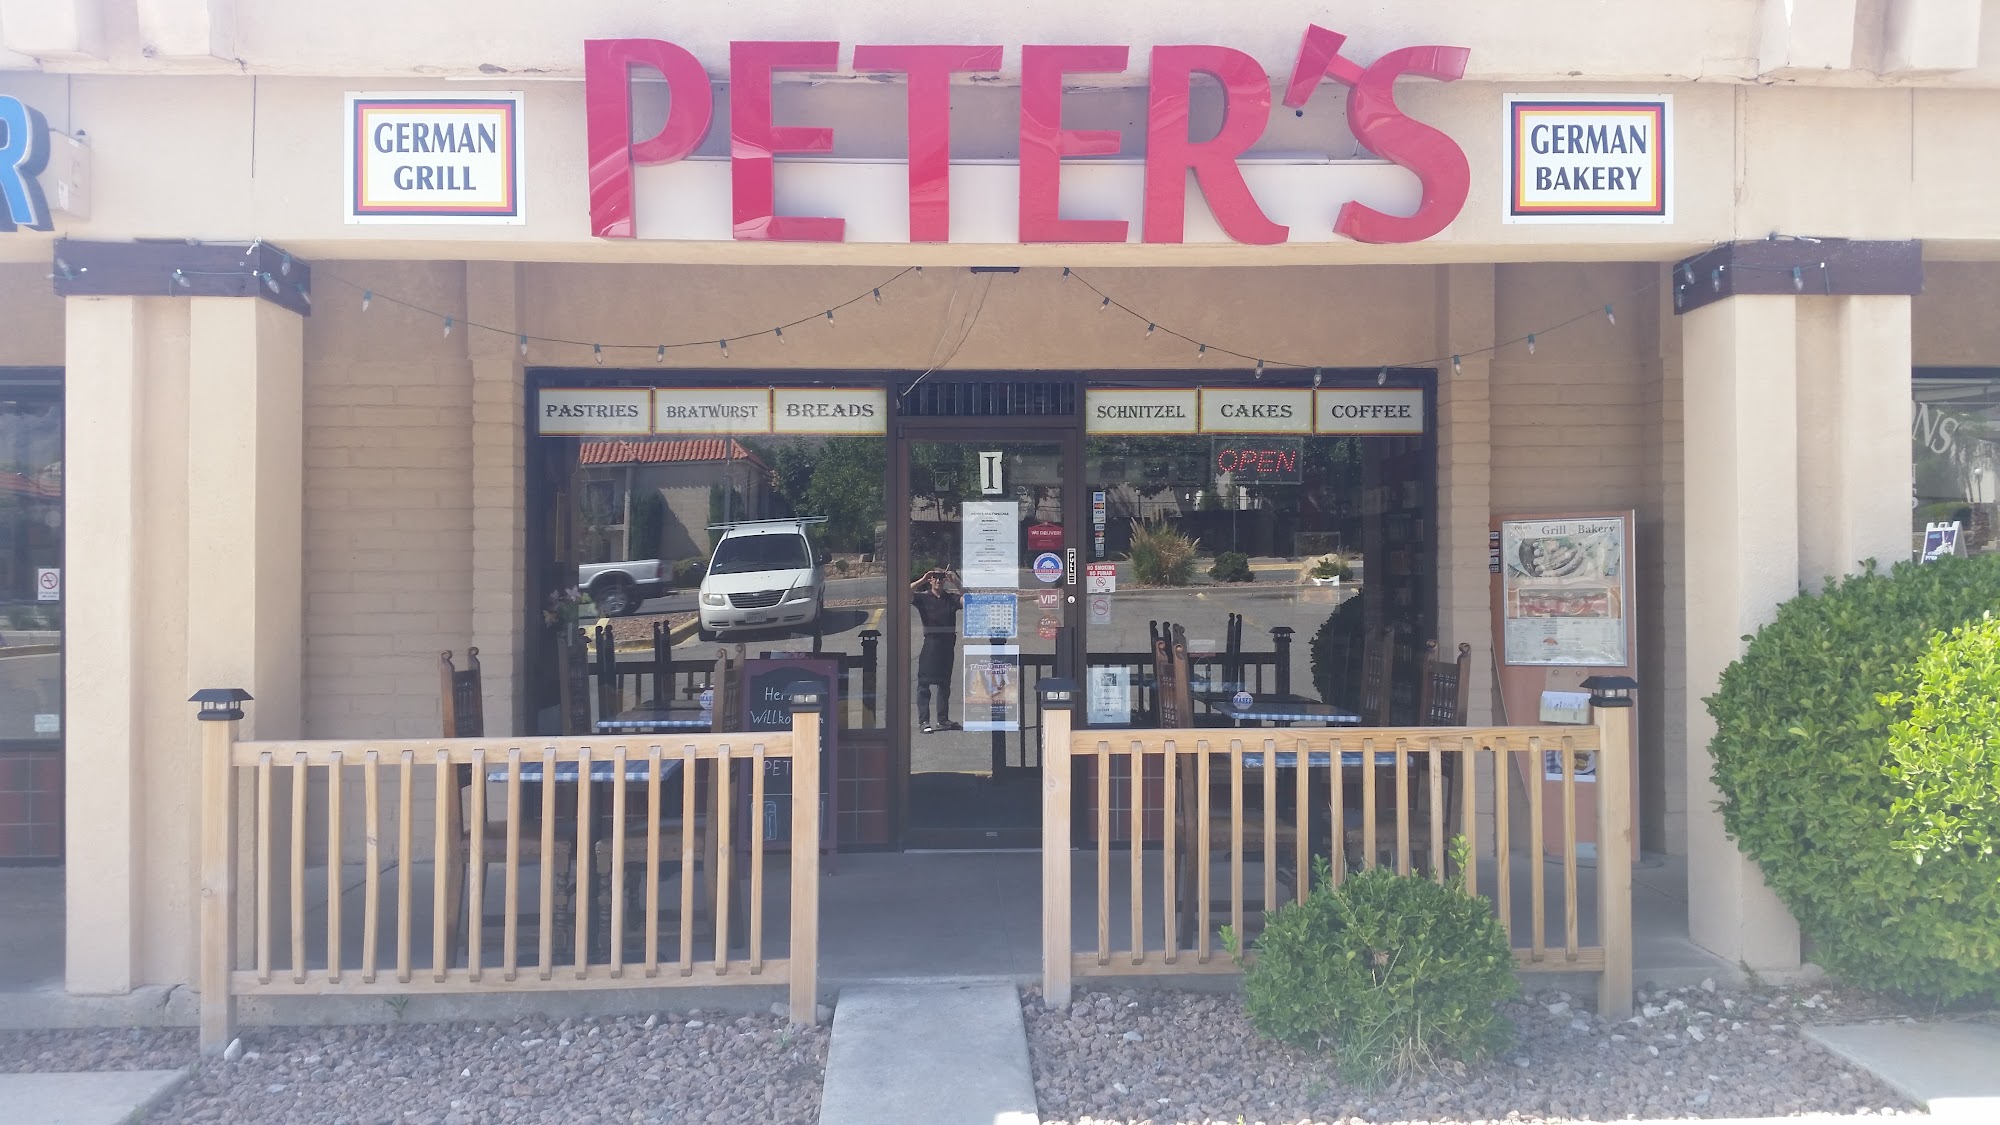 Peter's German Grill & Bakery